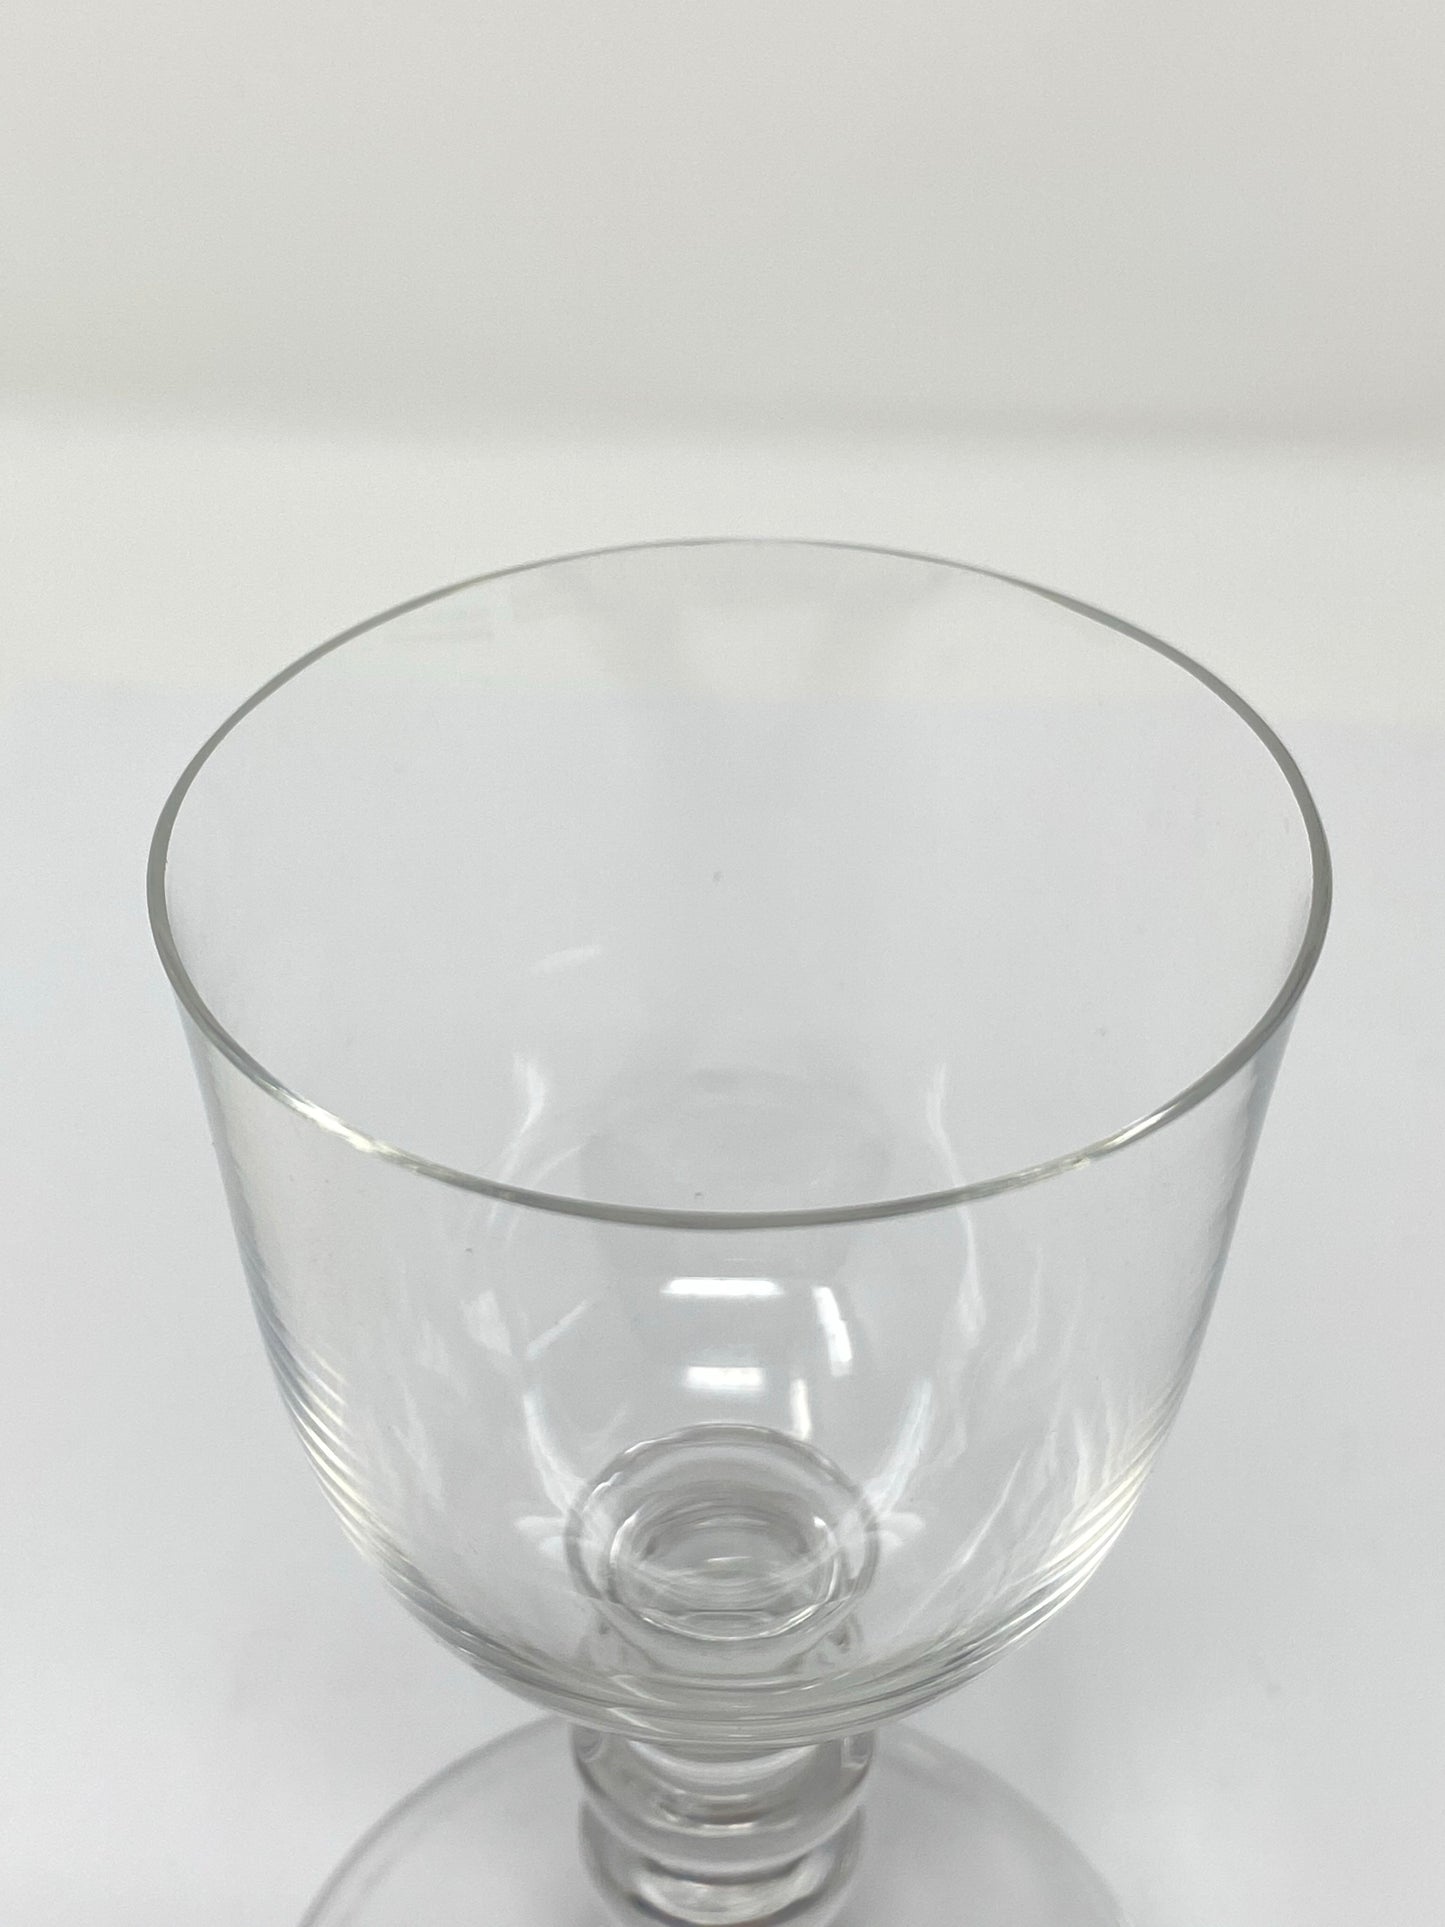 Baccarat Signed Provence French Crystal 4 3/8” Sherry Wine Glass